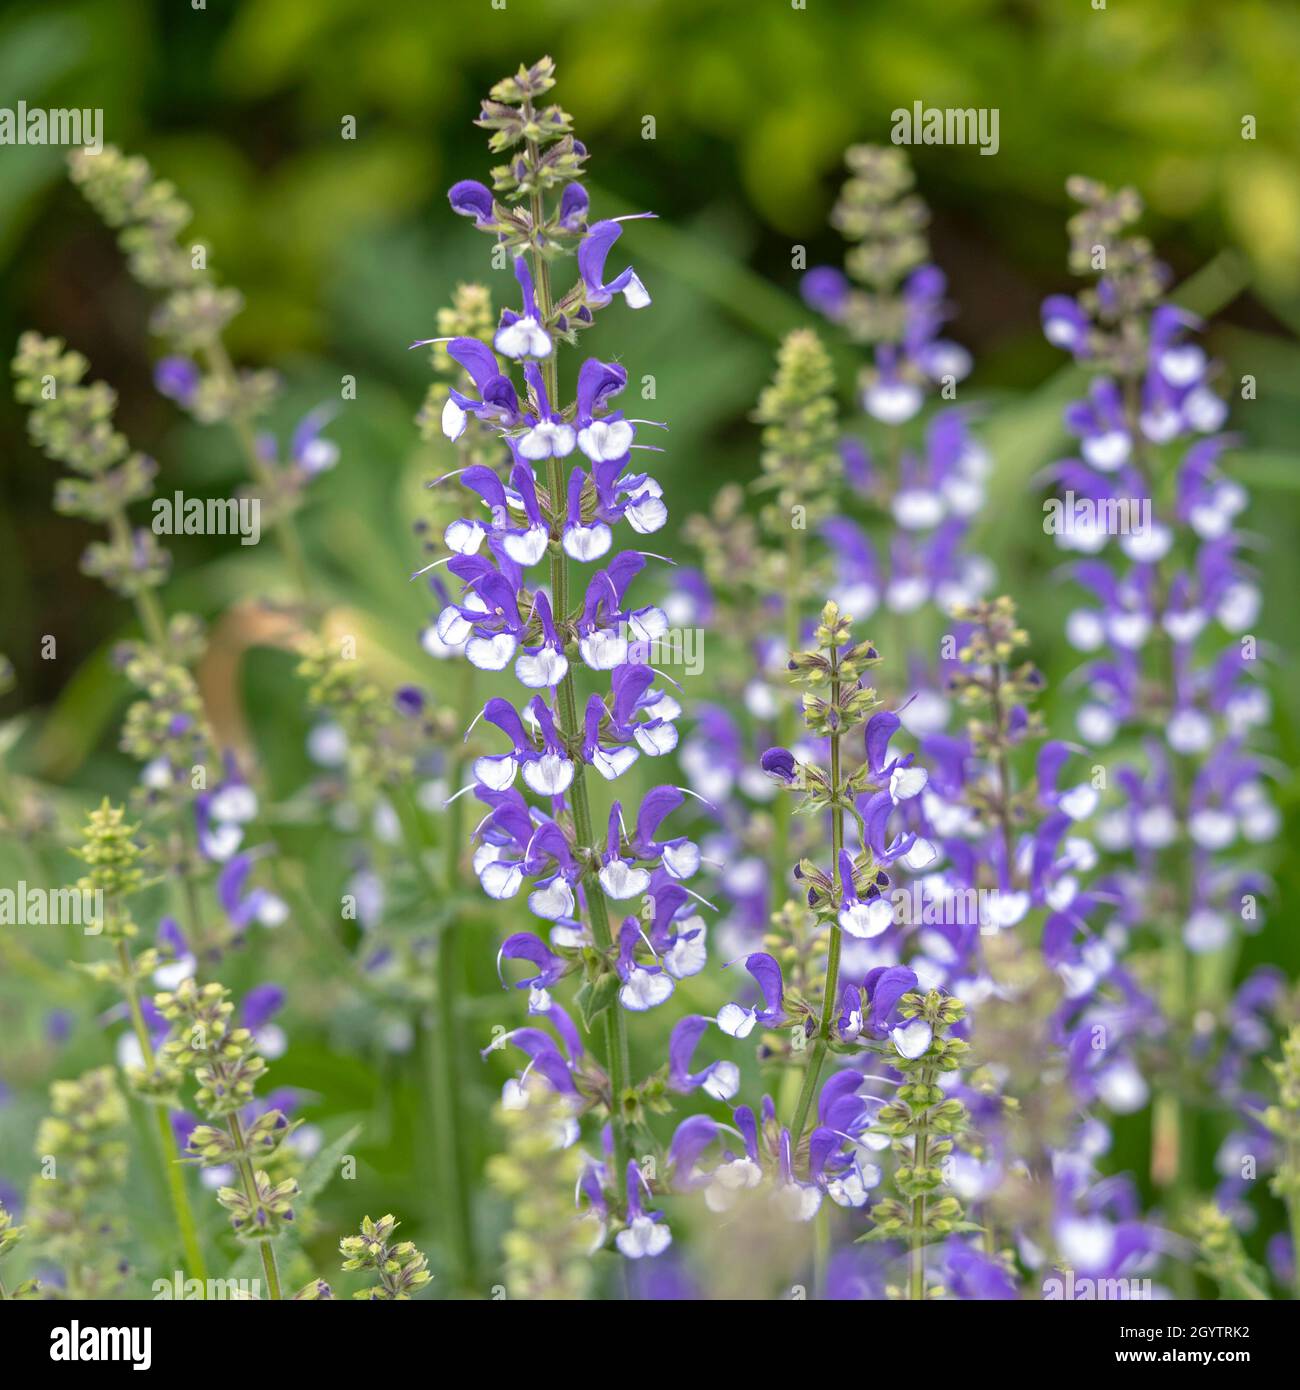 Blue and white flower spikes of Salvia farinacea Stock Photo